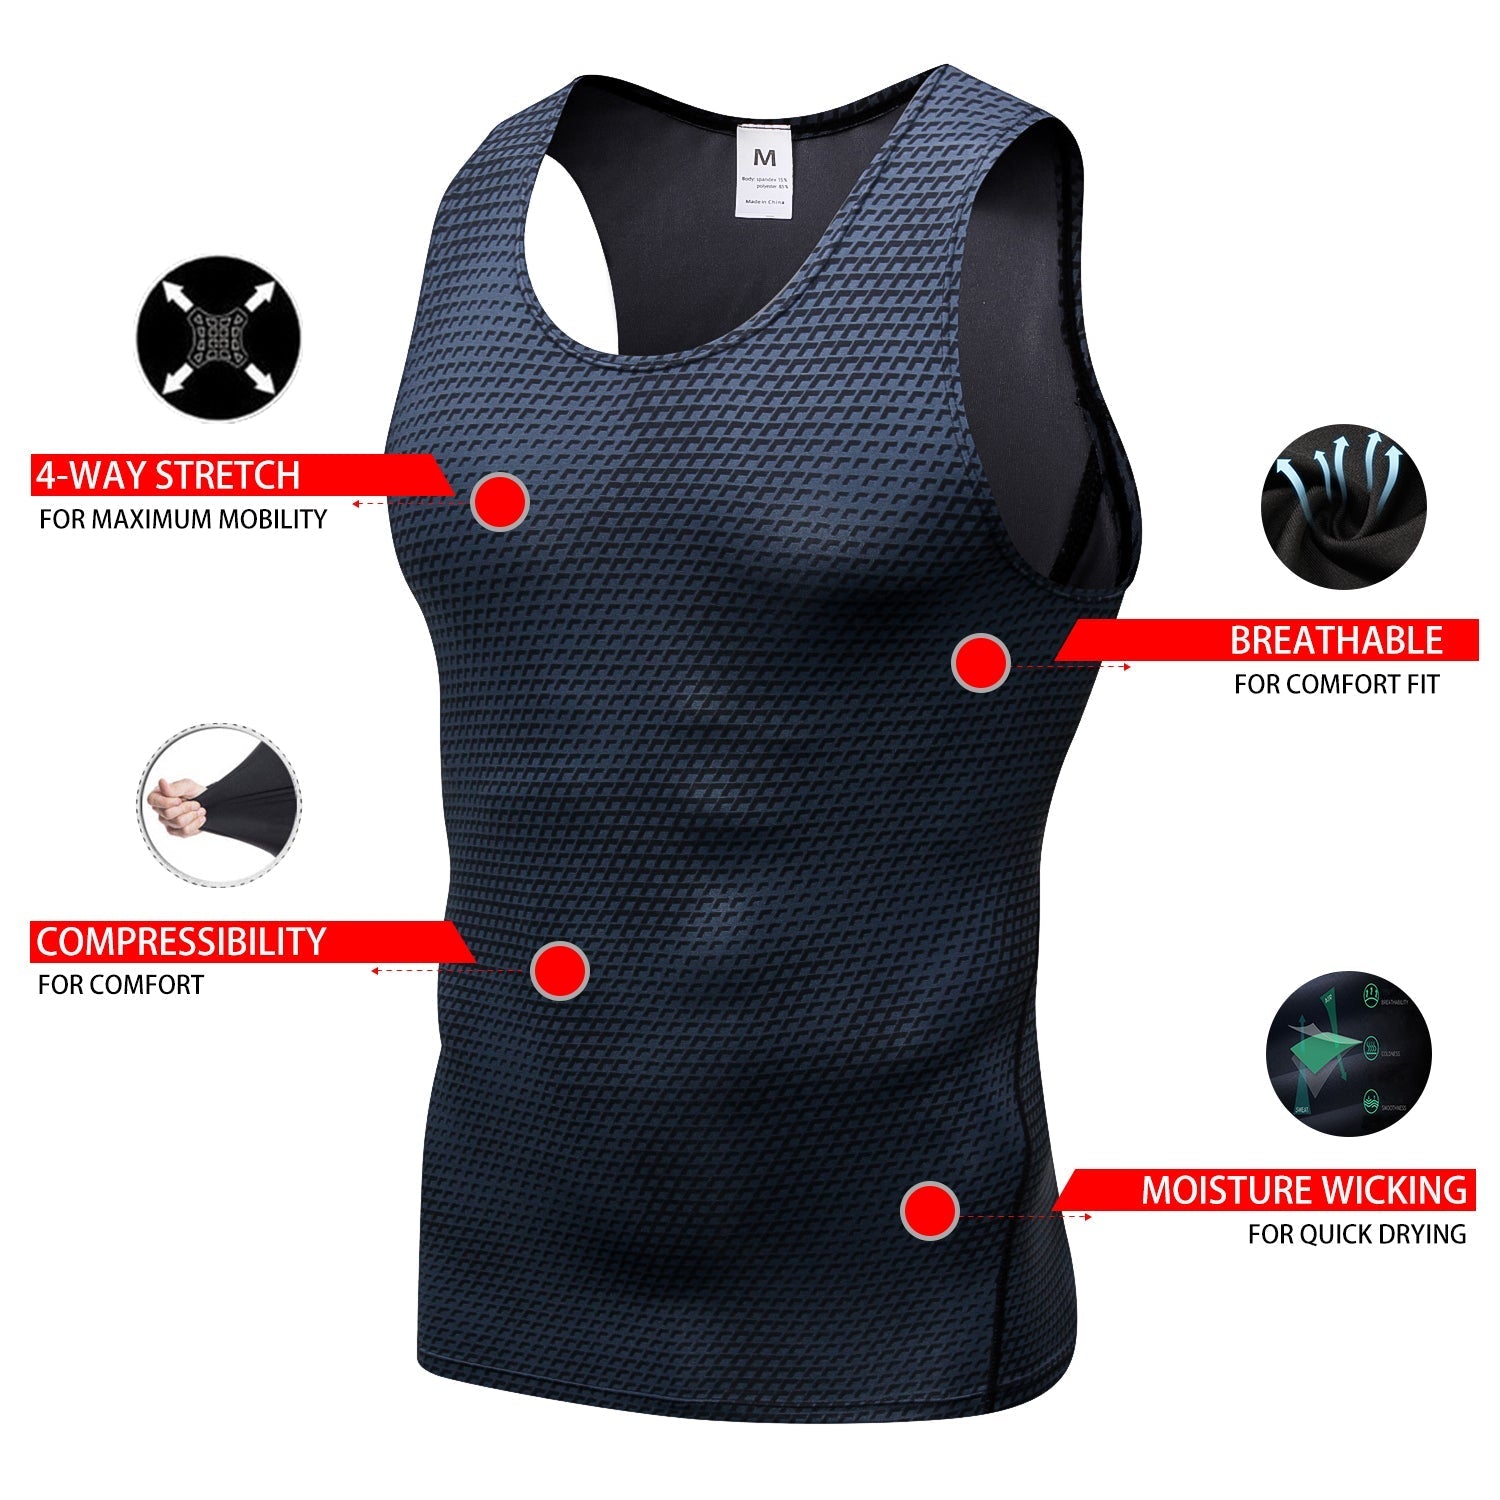 Mens Cool Dry Fit Compression Sleeveless Muscle Tank Tops Workout Base Layer LANBAOSI